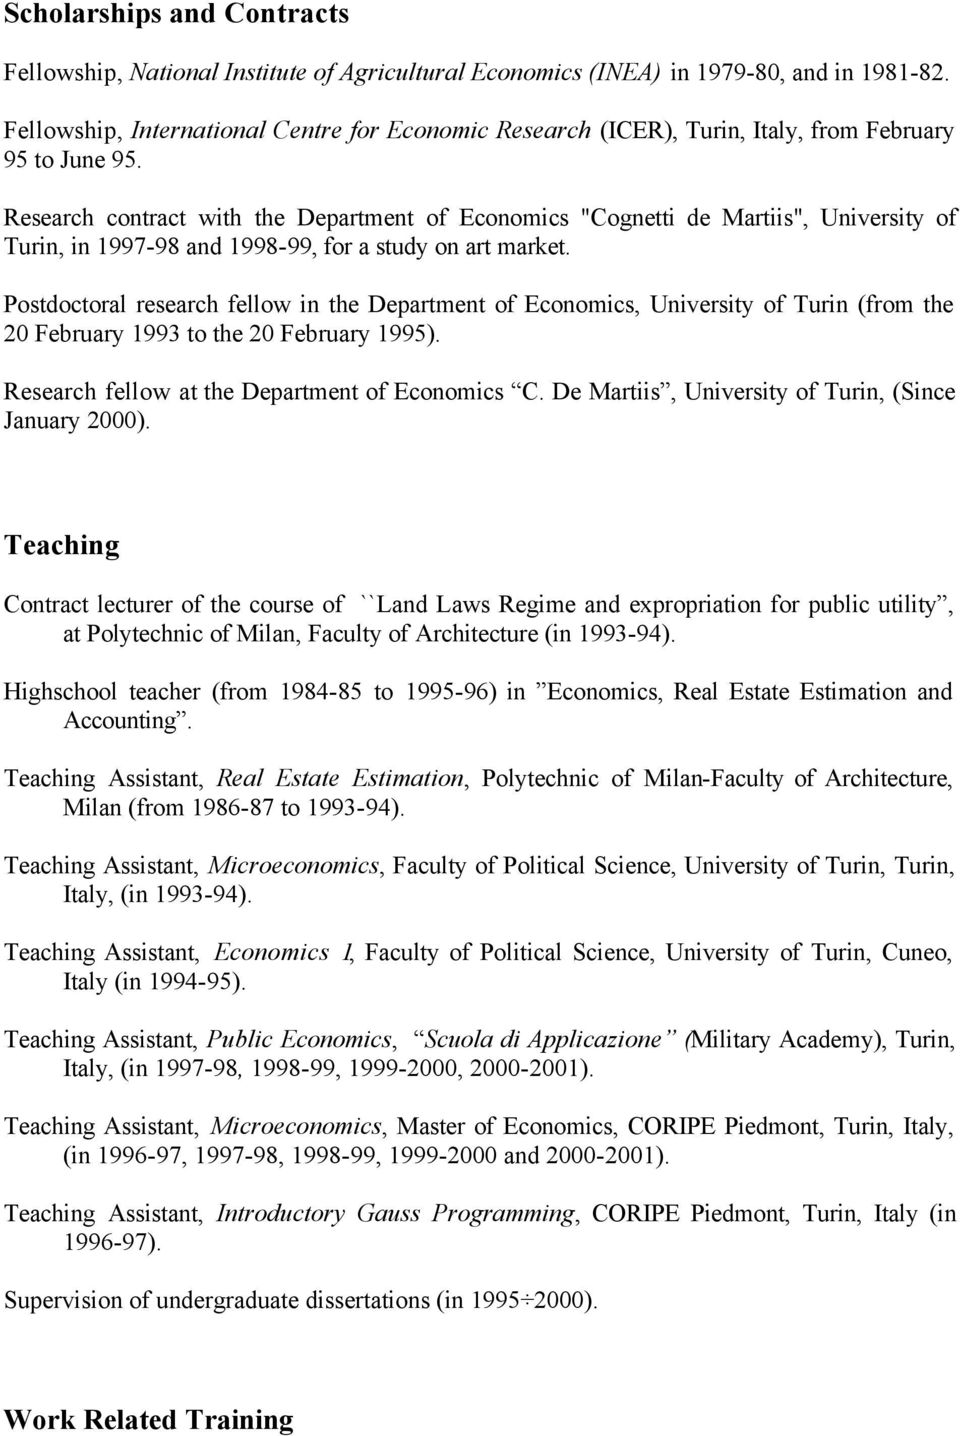 Research contract with the Department of Economics "Cognetti de Martiis", University of Turin, in 1997-98 and 1998-99, for a study on art market.